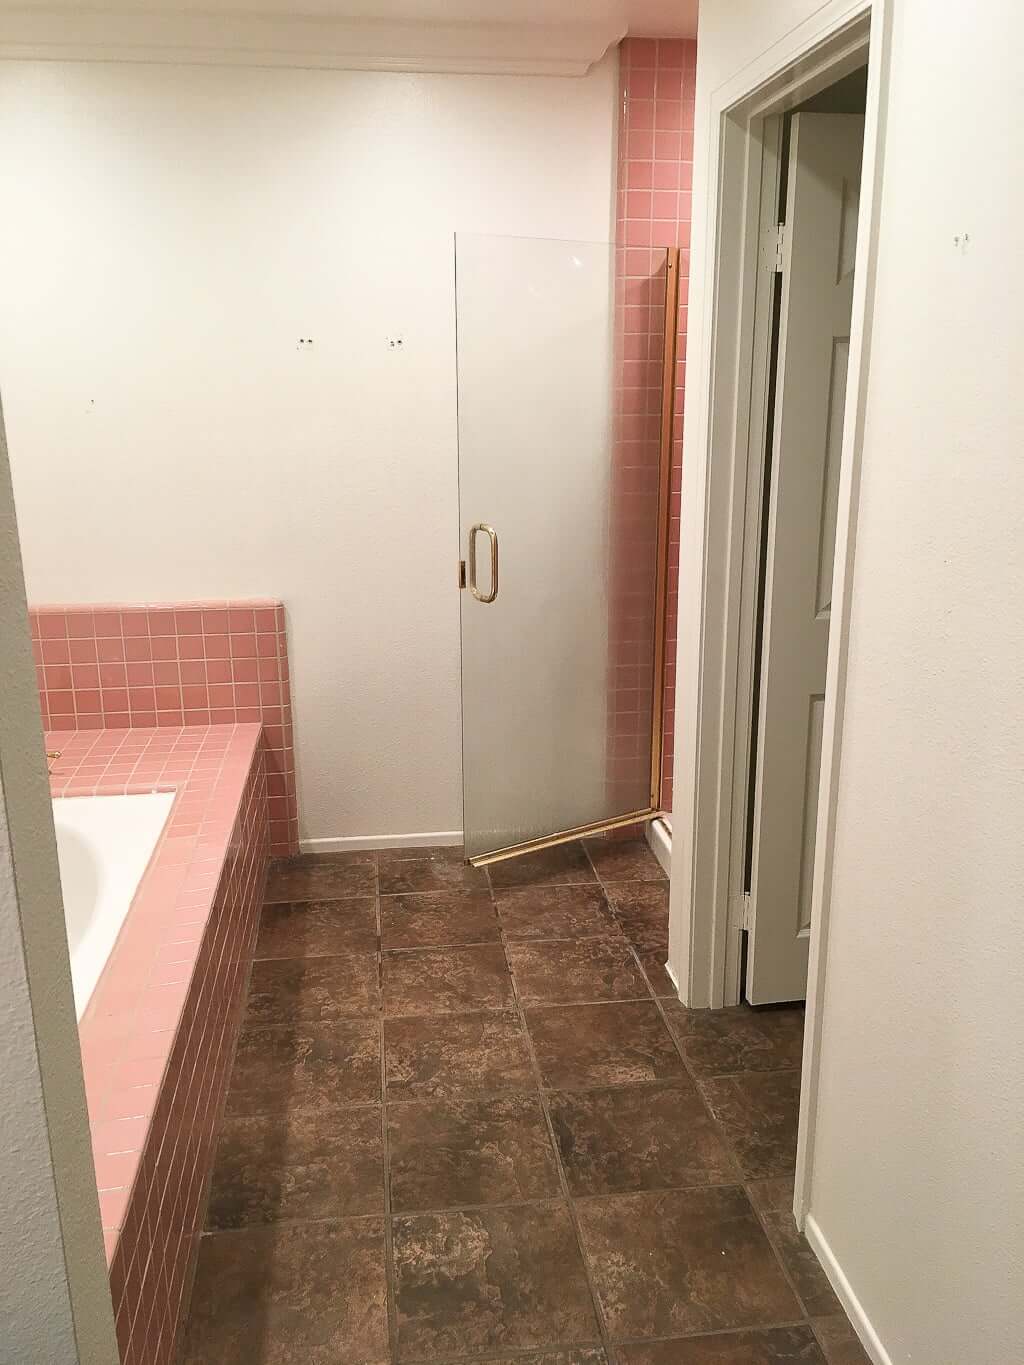 bathroom remodel before pic with pink tile and brown floor